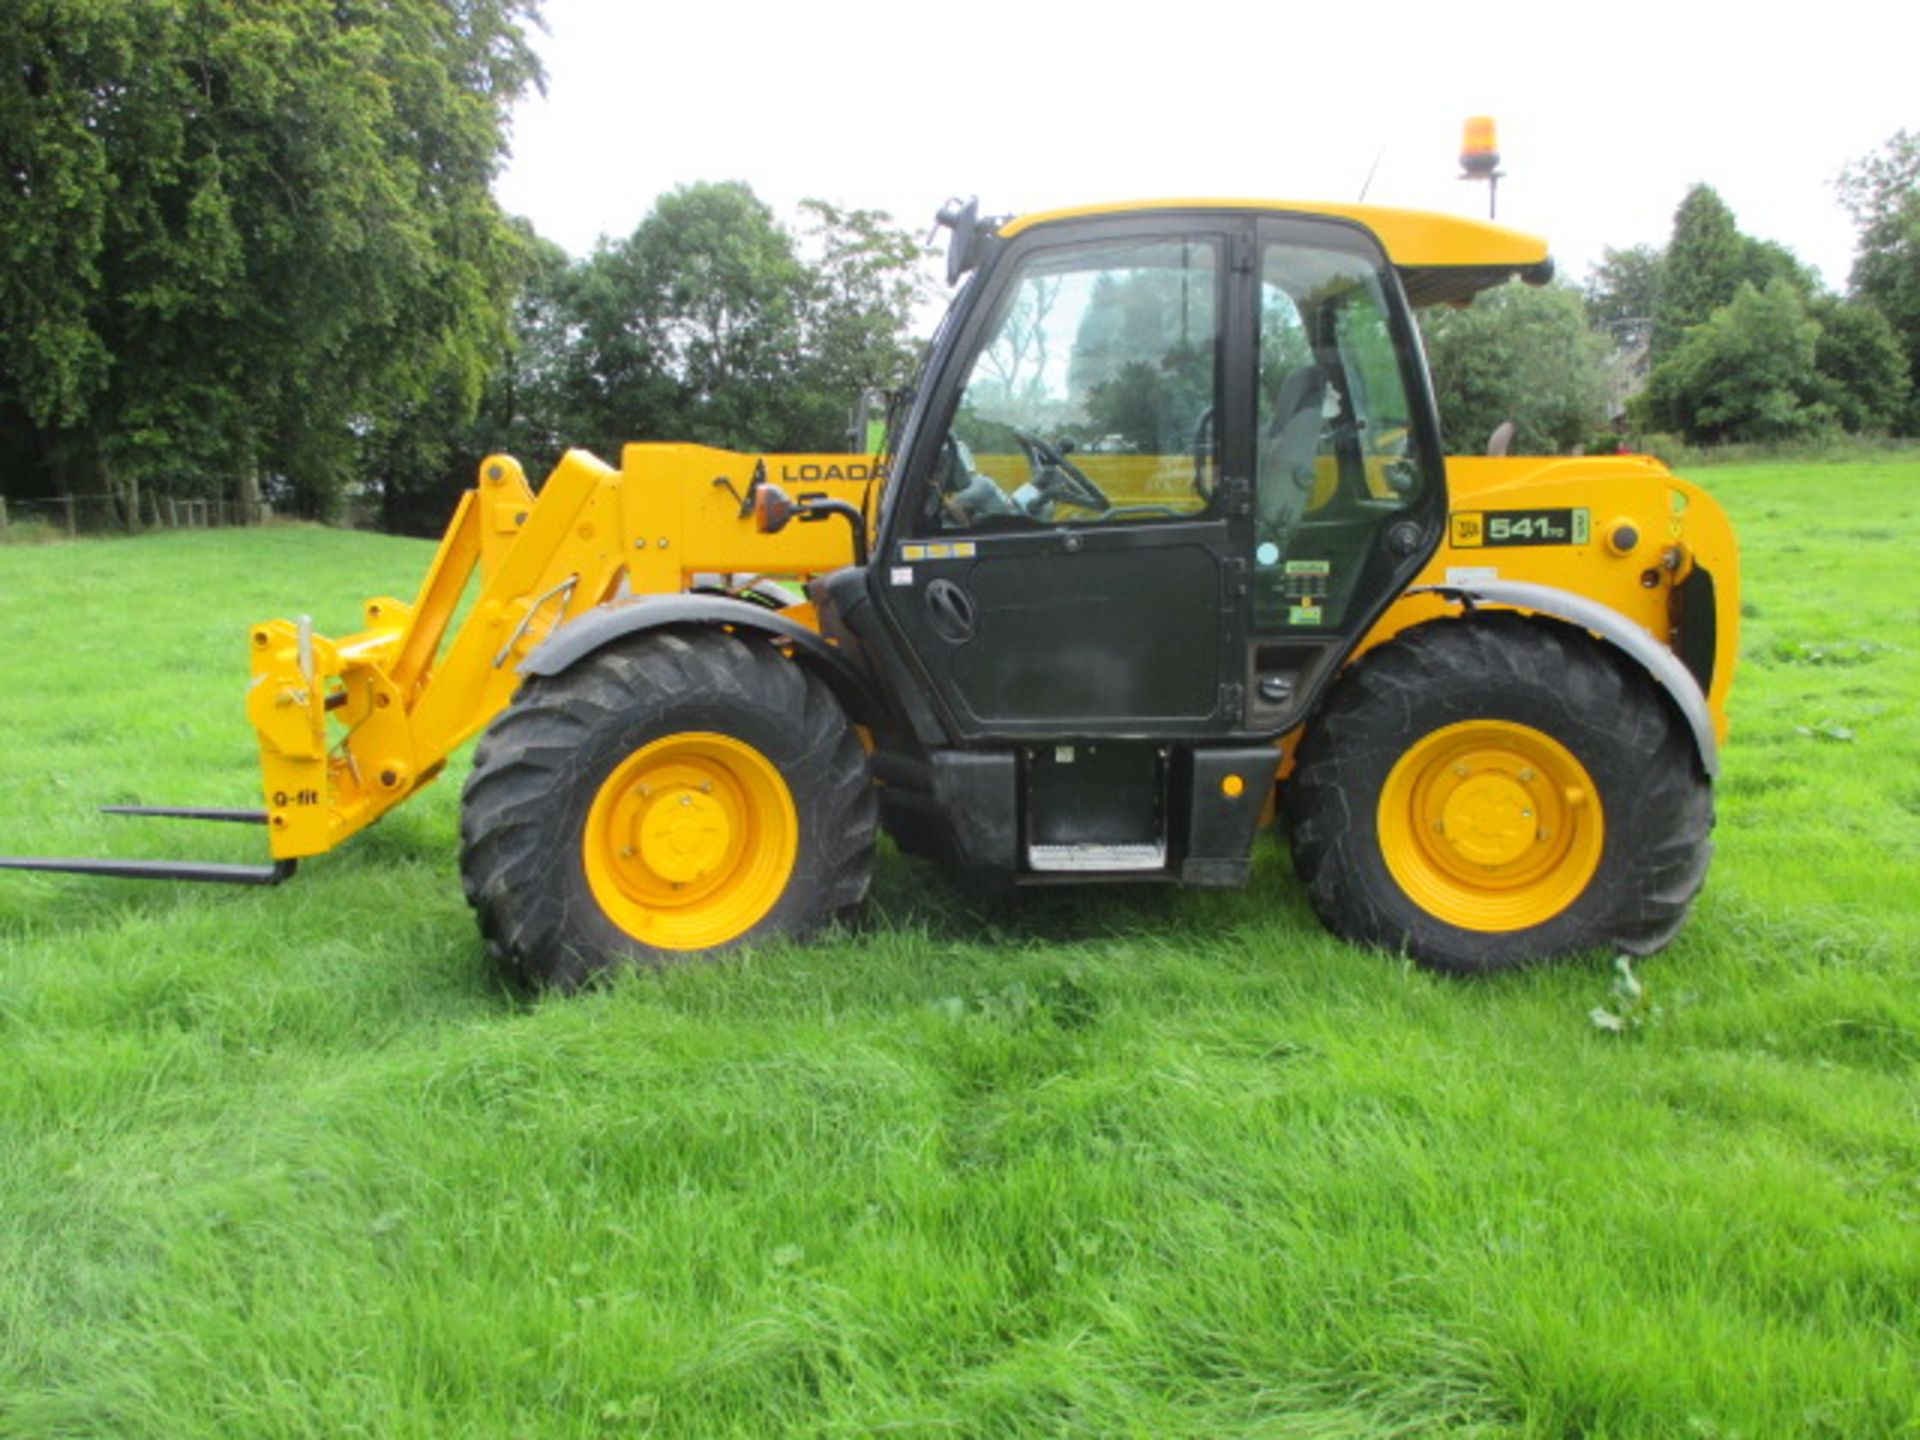 2006 JCB 541/70 Telehandler with large file of history. Council owned from new and dealer maintained - Image 2 of 11